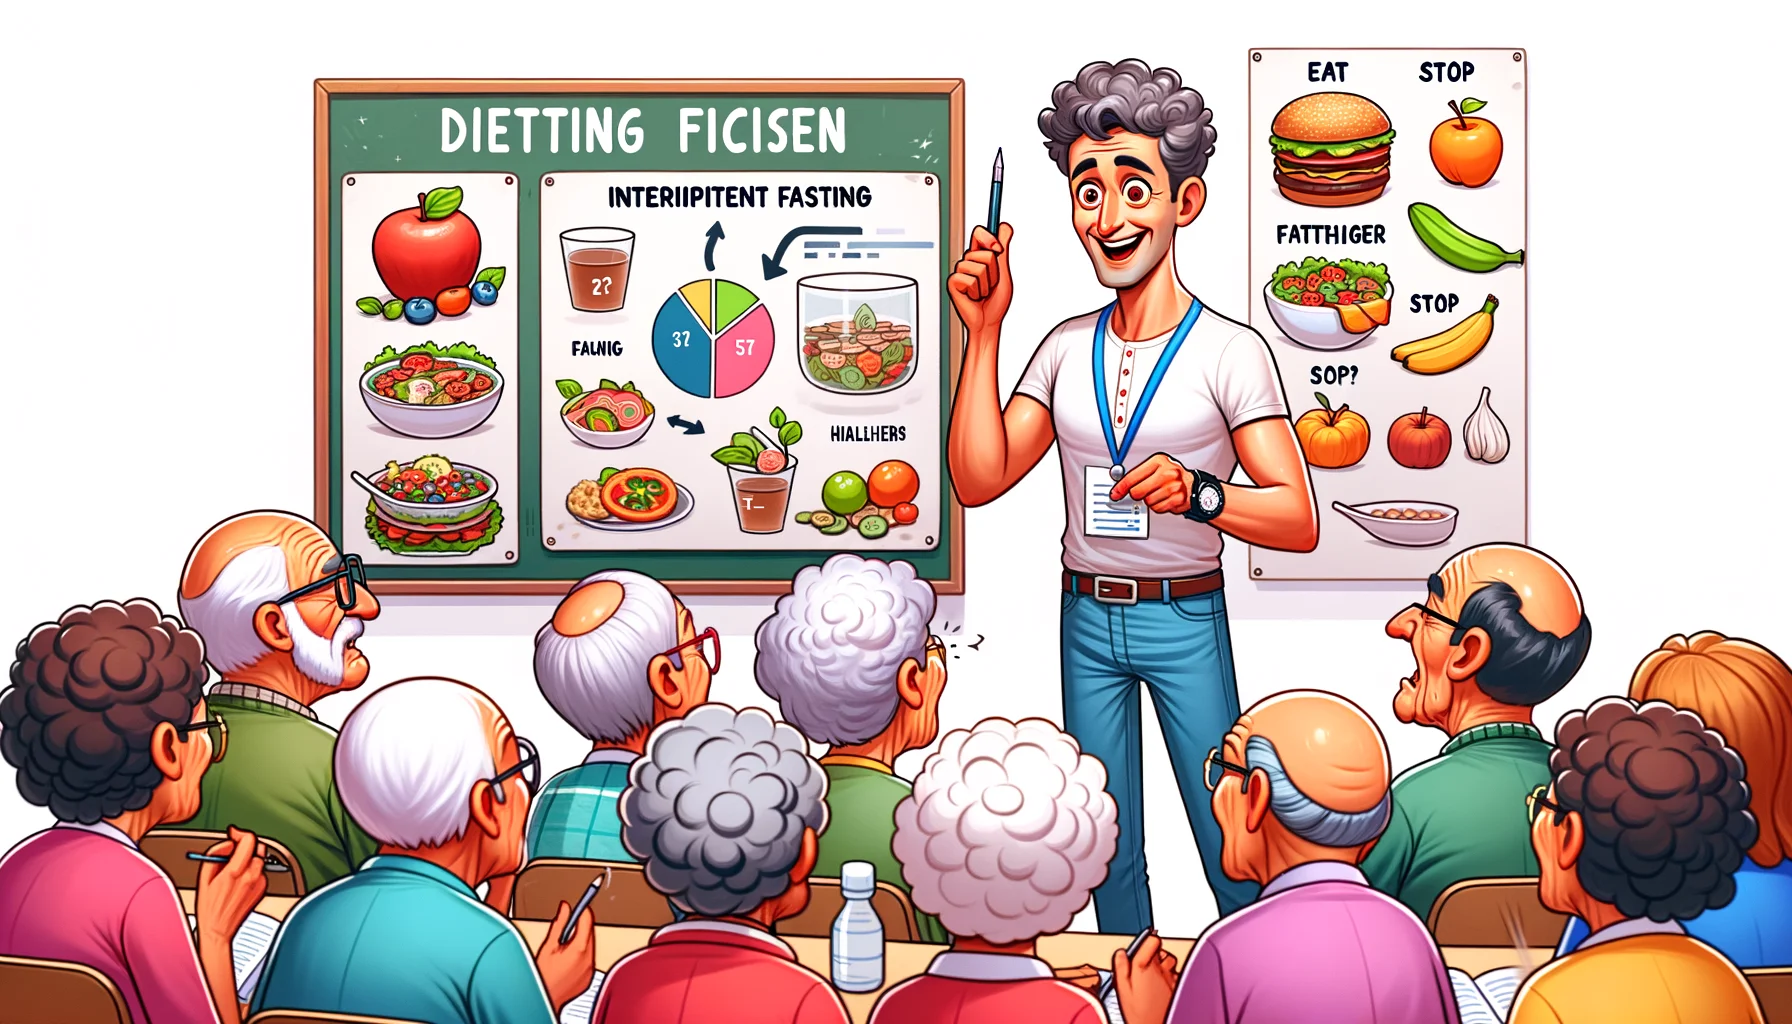 Illustrate a hilarious, realistic scenario related to an older dieting community. Picture a charismatic nutritionist with short curly hair, a friendly face, wearing casual attire. He is seen explaining, with charts and healthier food options, the philosophy of intermittent fasting - 'eat, stop, eat' to an enthusiastic group of elderly individuals. Some confused faces, some very excited and engaged in the concept, leading to funny reactions. Create the image in a colorful, comedic style, capturing the light-hearted essence of the diet conversation.